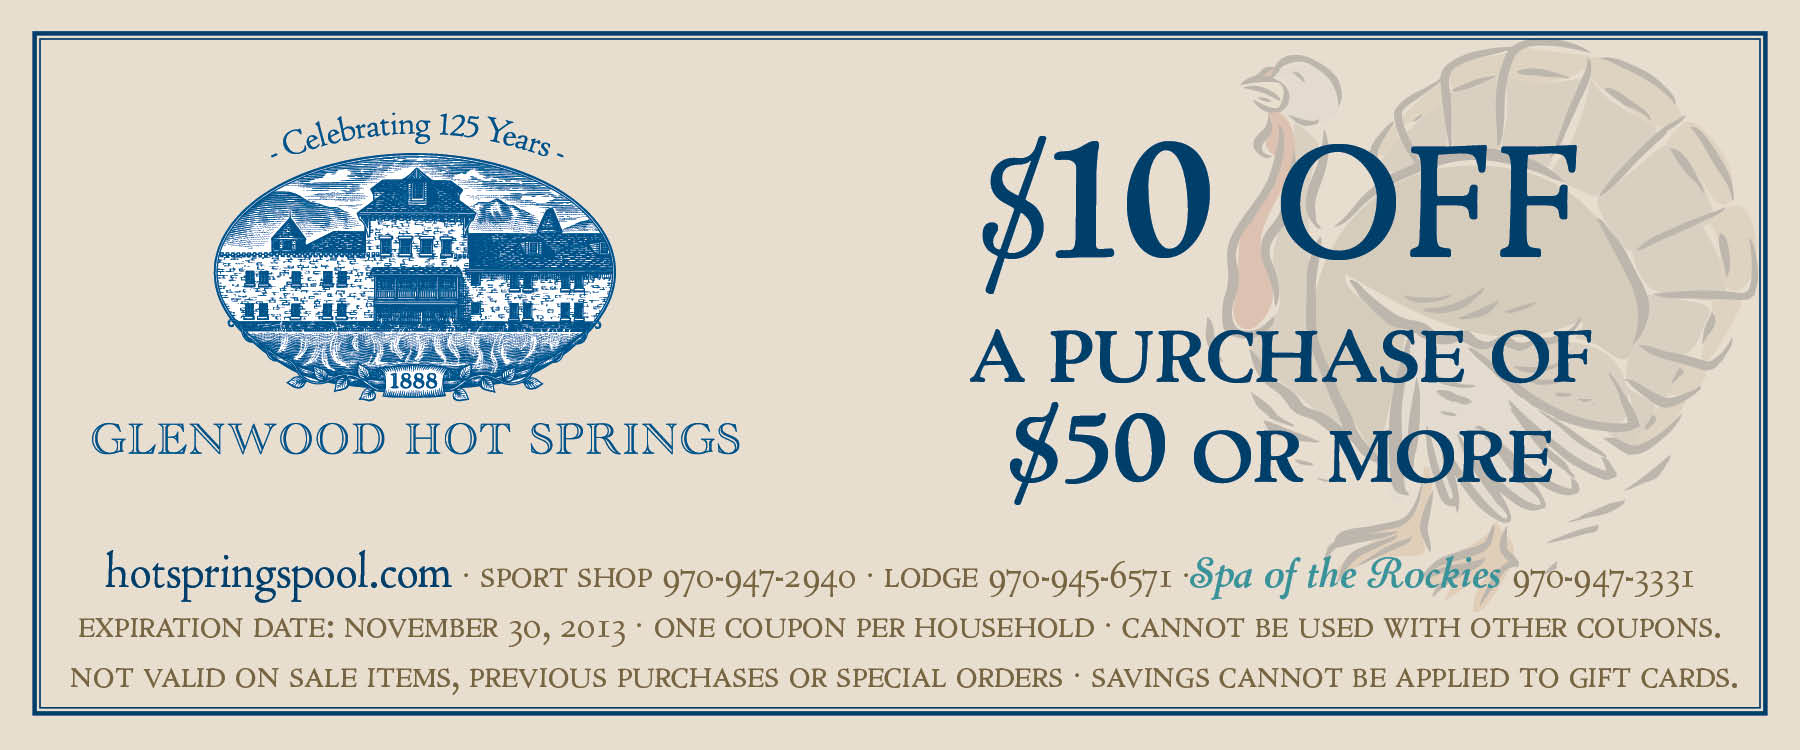 An example of an upcoming coupon that can be printed by visiting the Glenwood Hot Springs' website